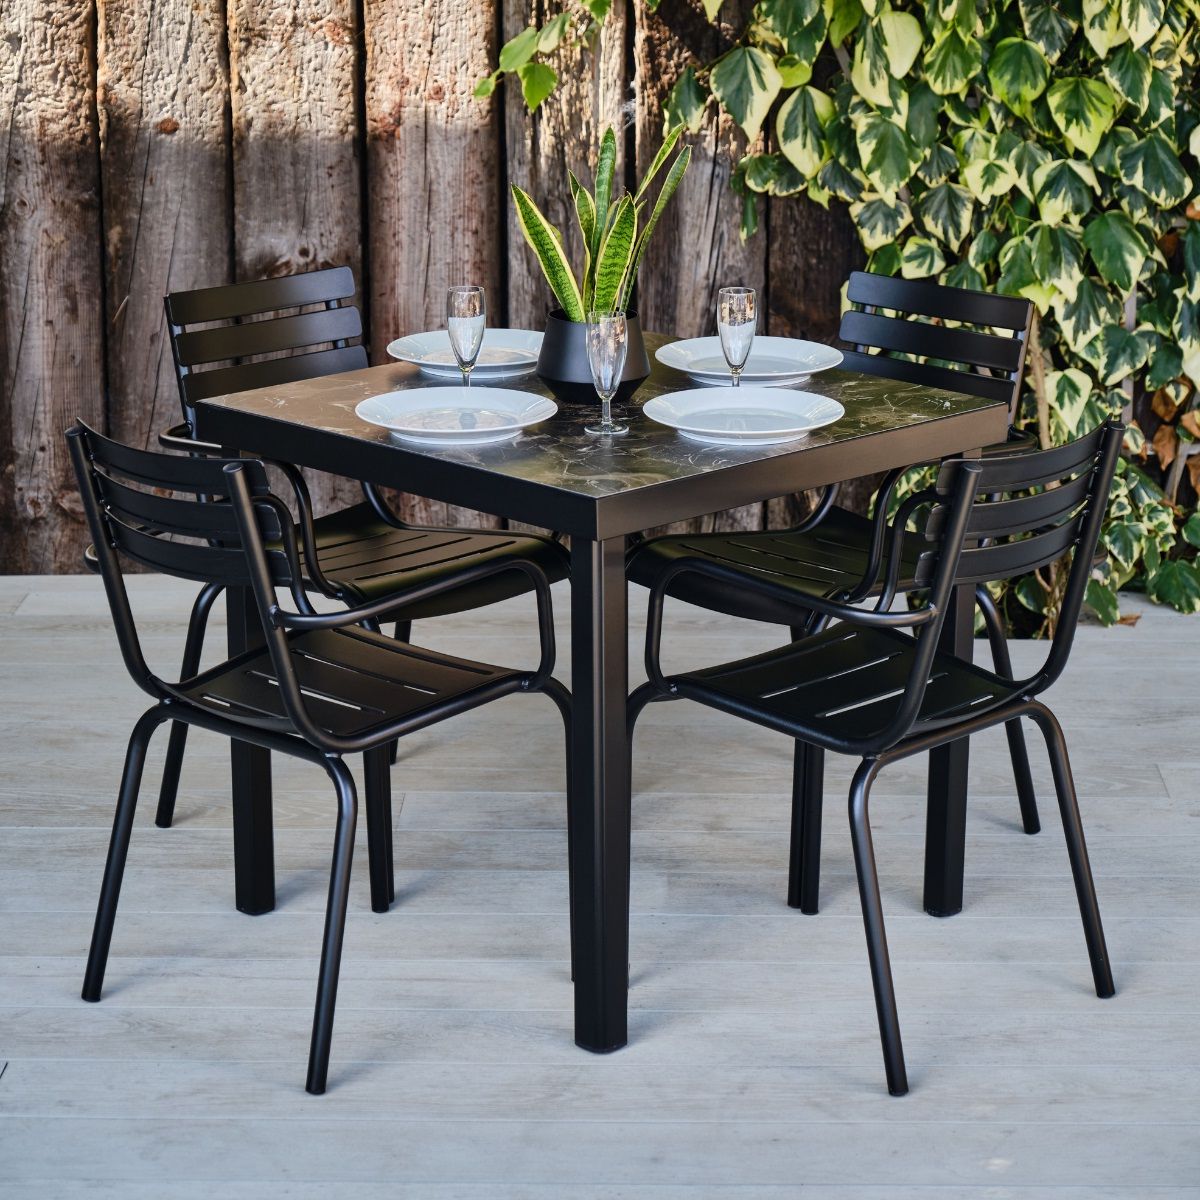 Square Outdoor Table Black & Marble Effect – Camden Range – Woodberry Intended For Well Liked Black Square Outdoor Tables (View 8 of 15)